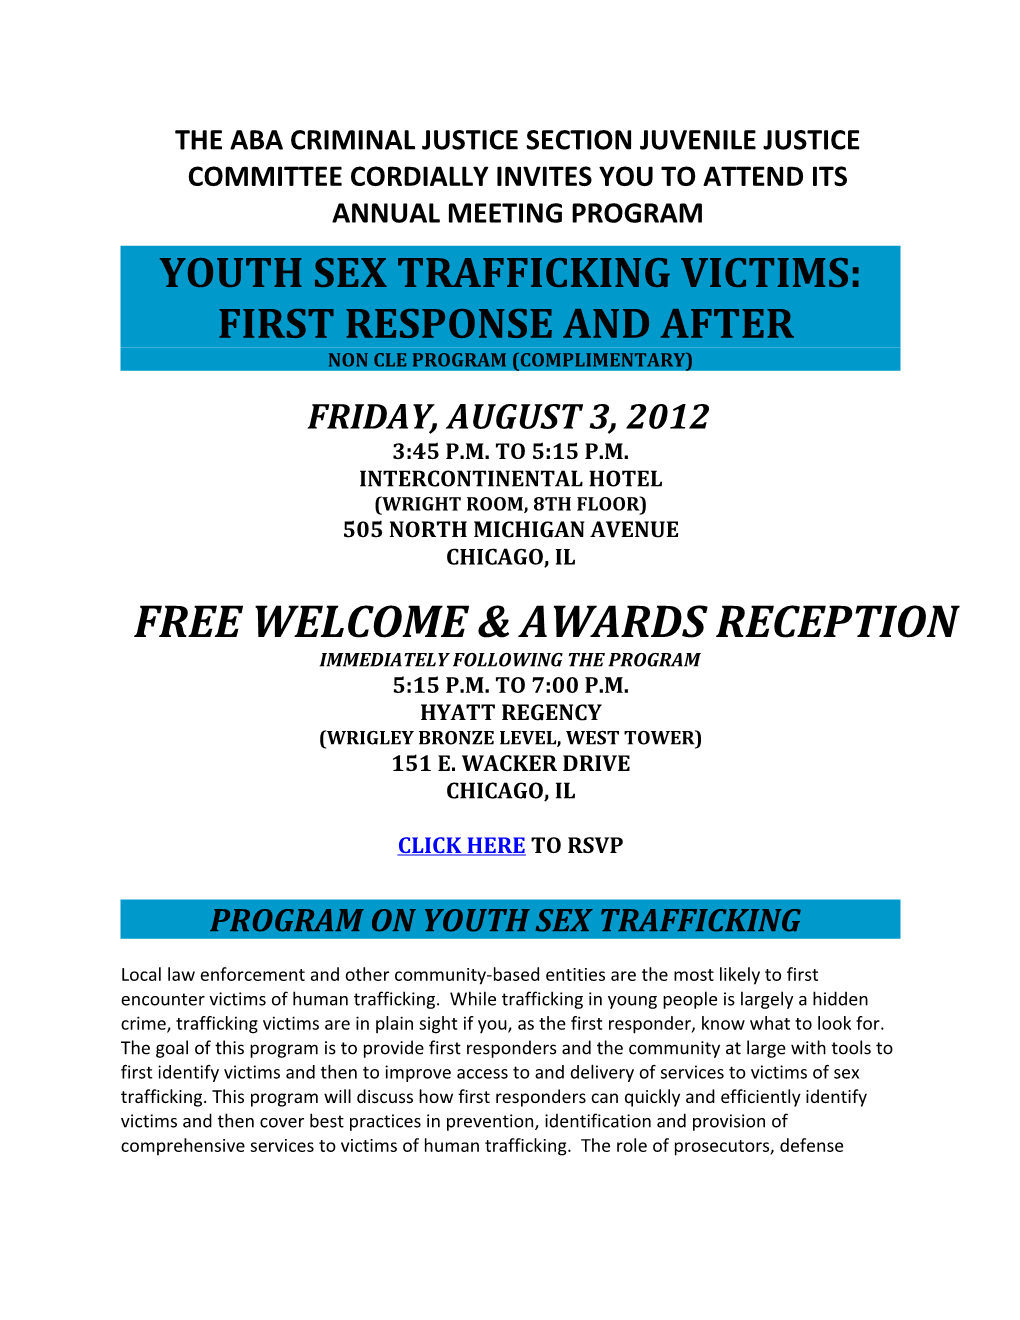 Aba Criminal Justice Section Cordially Invites You